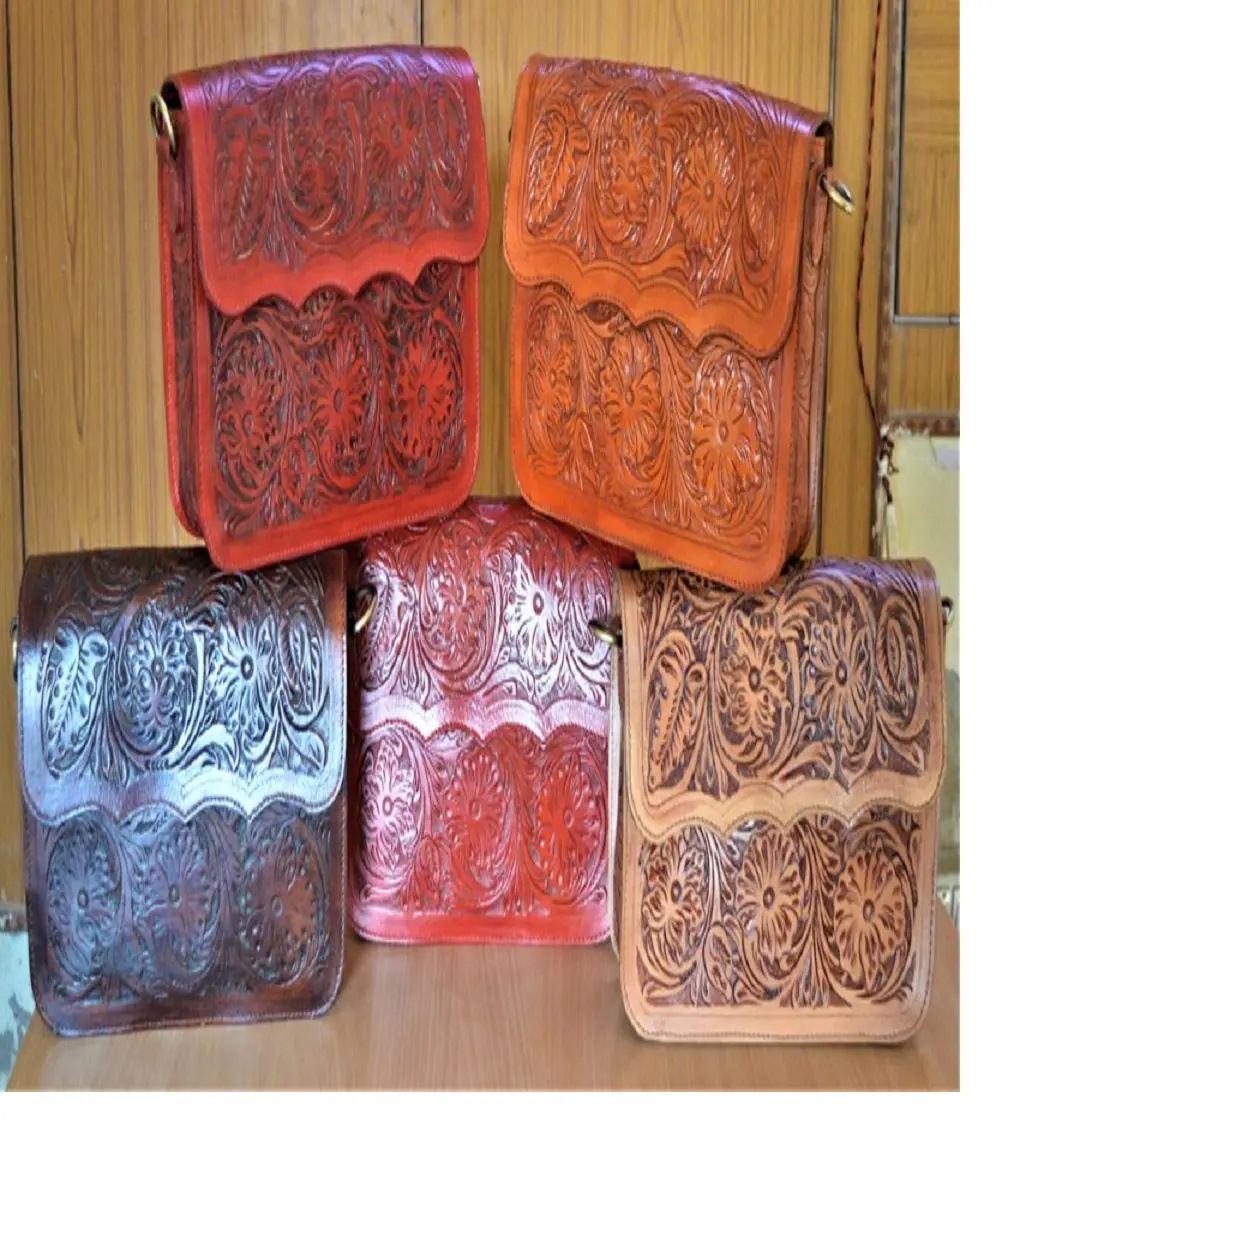 custom made multi coloured hand carved leather wallets, purses and bags made from real leather with intricately carved patterns